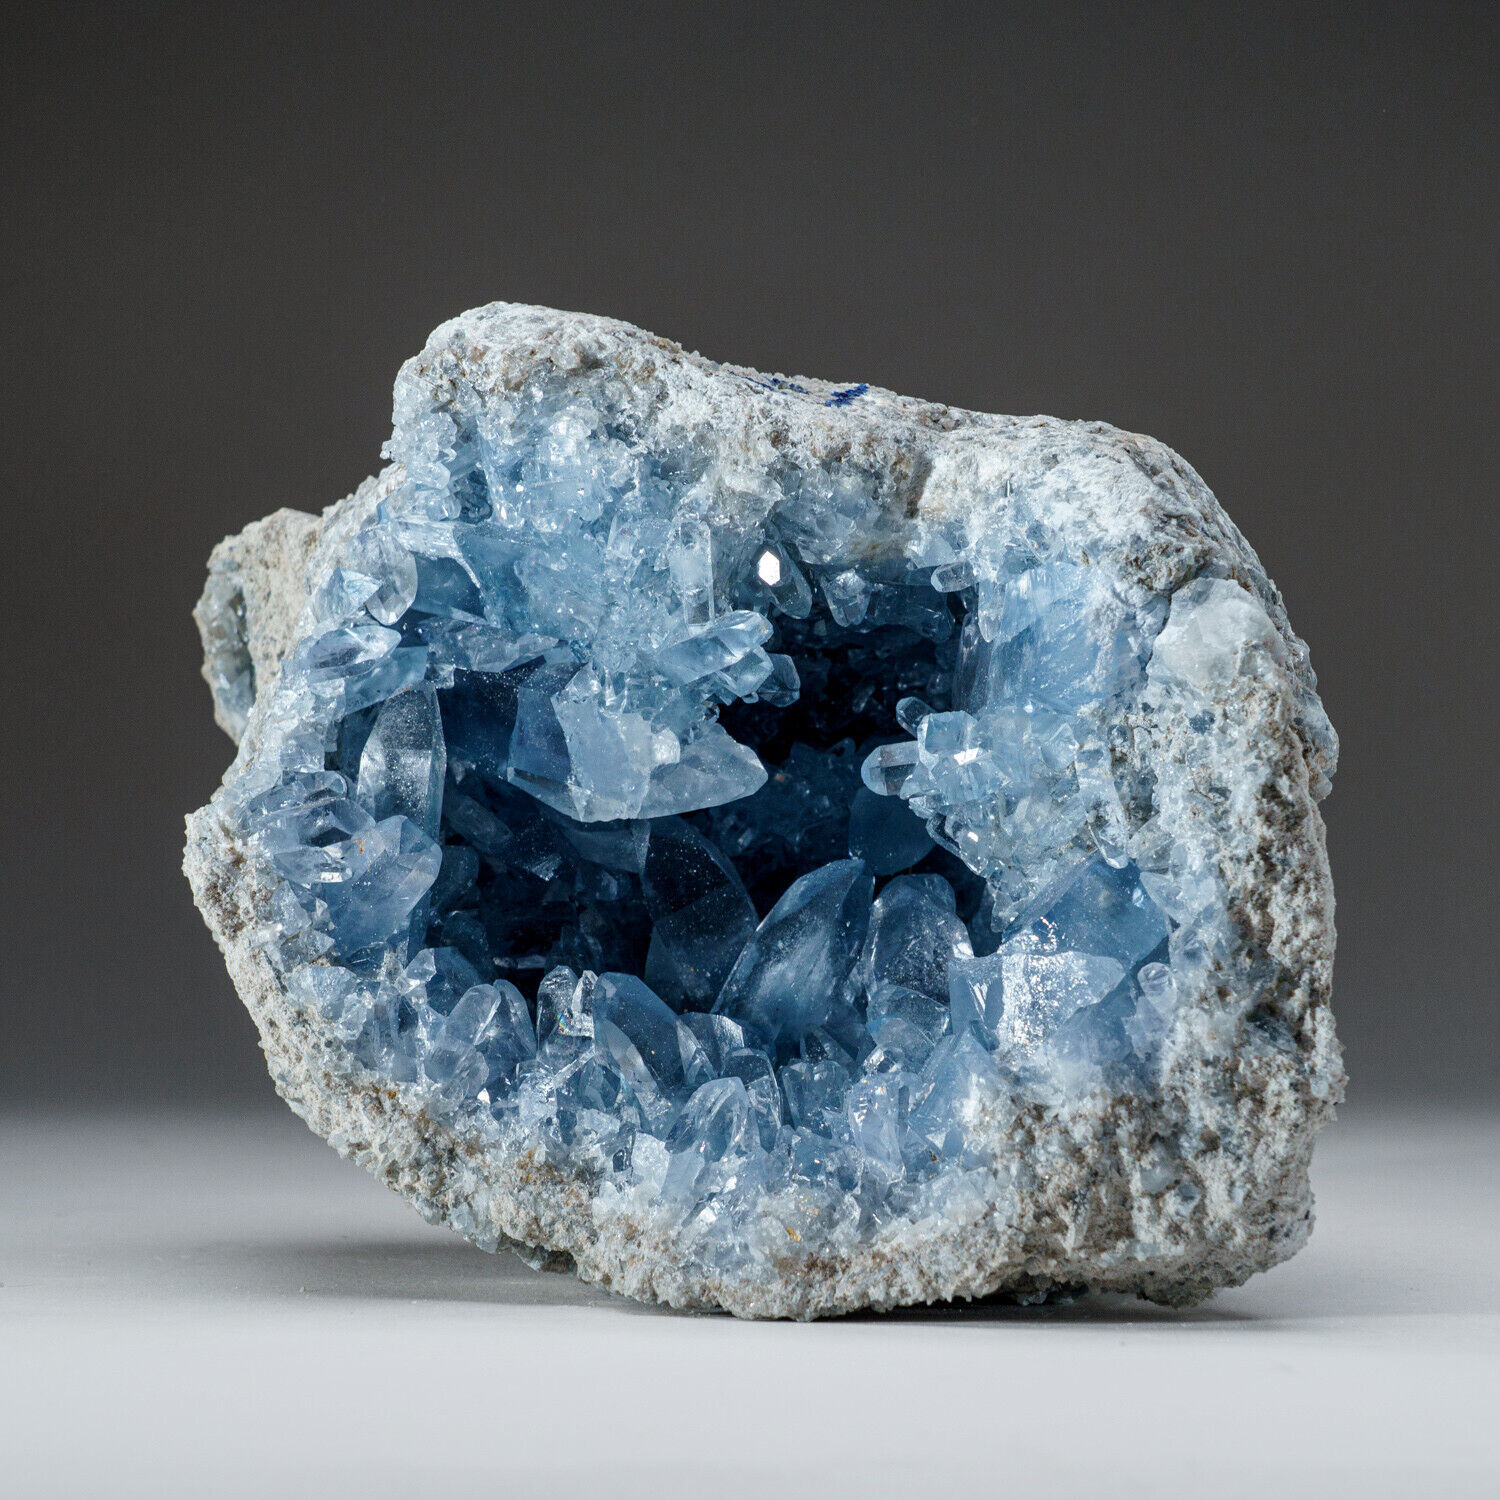 Blue Celestite Cluster Geode From Sankoany, Madagascar (12 lbs)